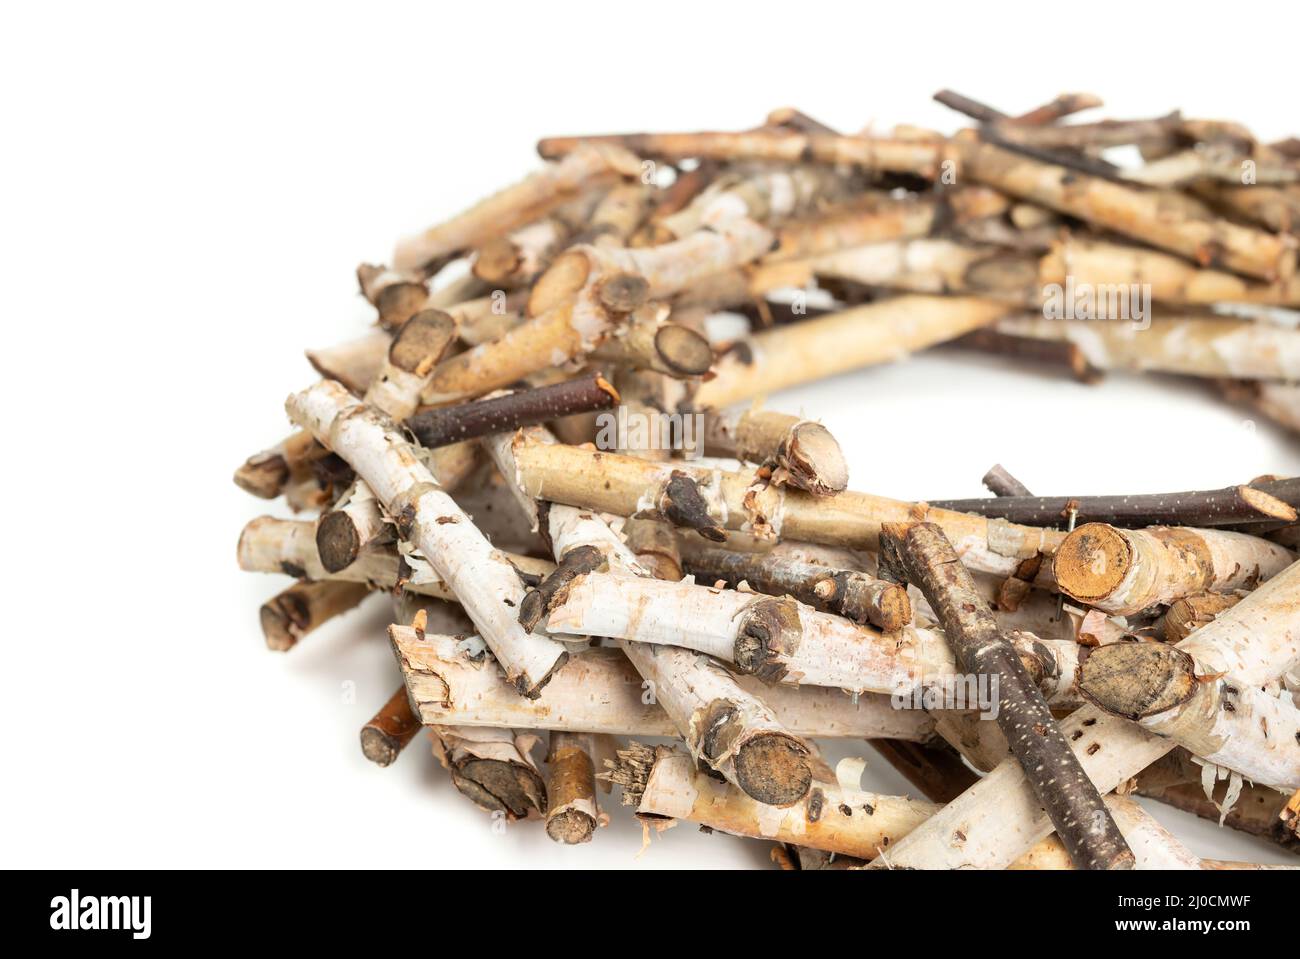 Real birch twig wreath. Birch tree branches arranged in a large circular nest shape. Natural wood decoration used for table center pieces or seasonal Stock Photo